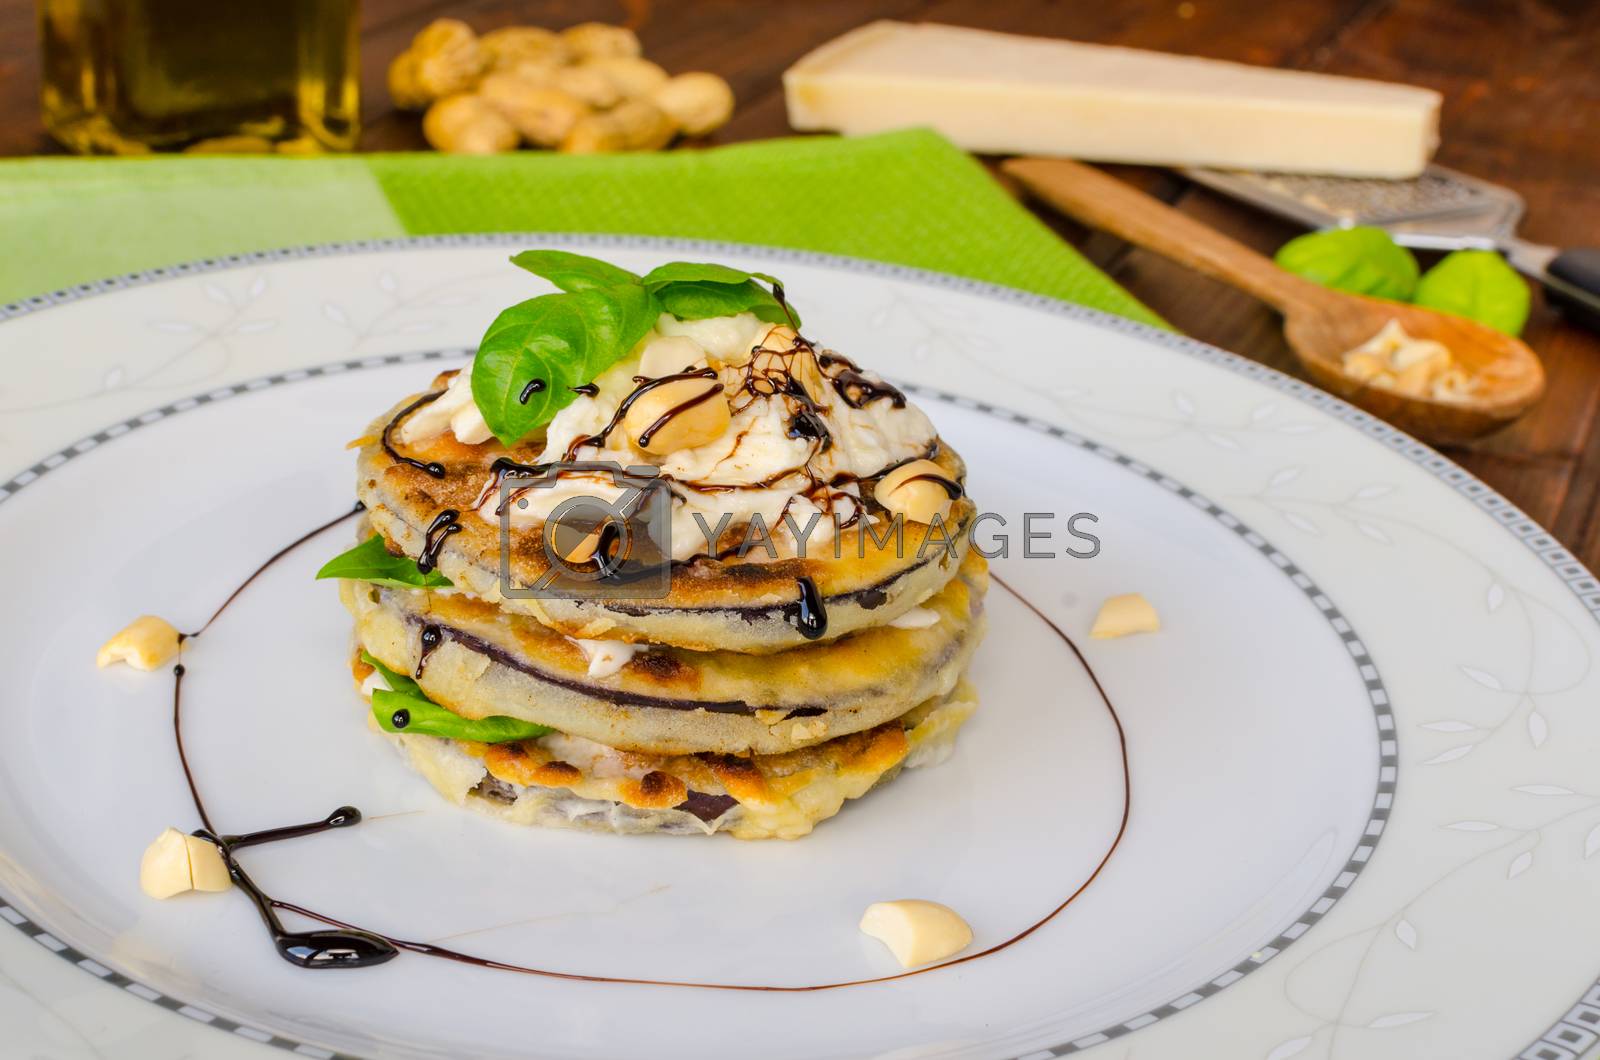 Royalty free image of Grilled eggplant with feta cheese,parmesan basil, nuts by Peteer